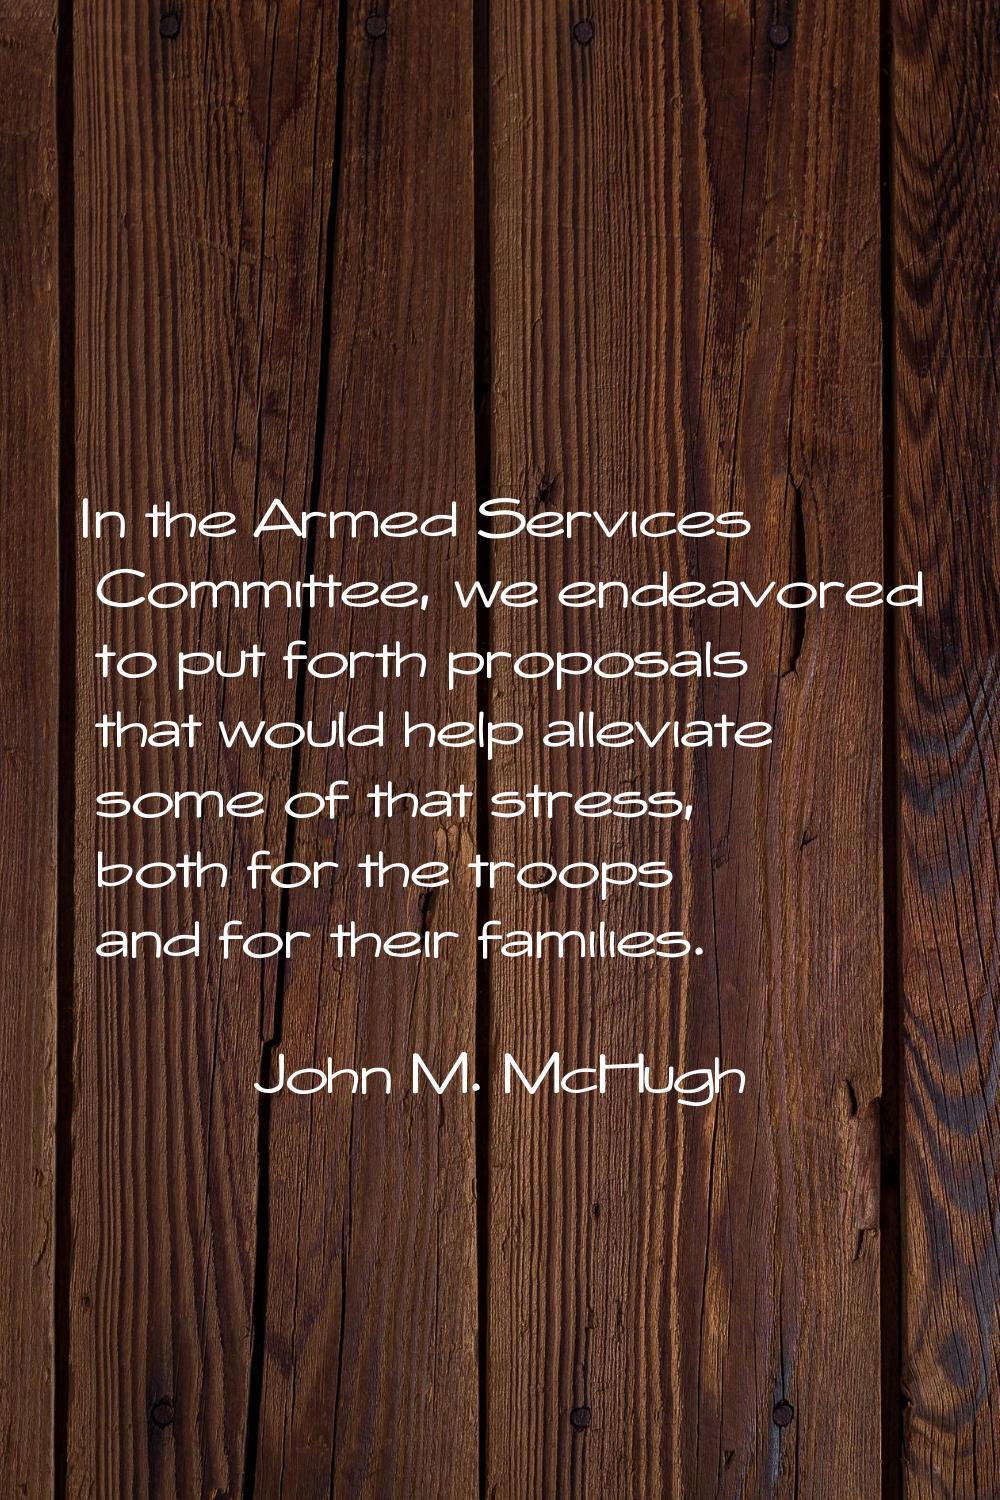 In the Armed Services Committee, we endeavored to put forth proposals that would help alleviate som